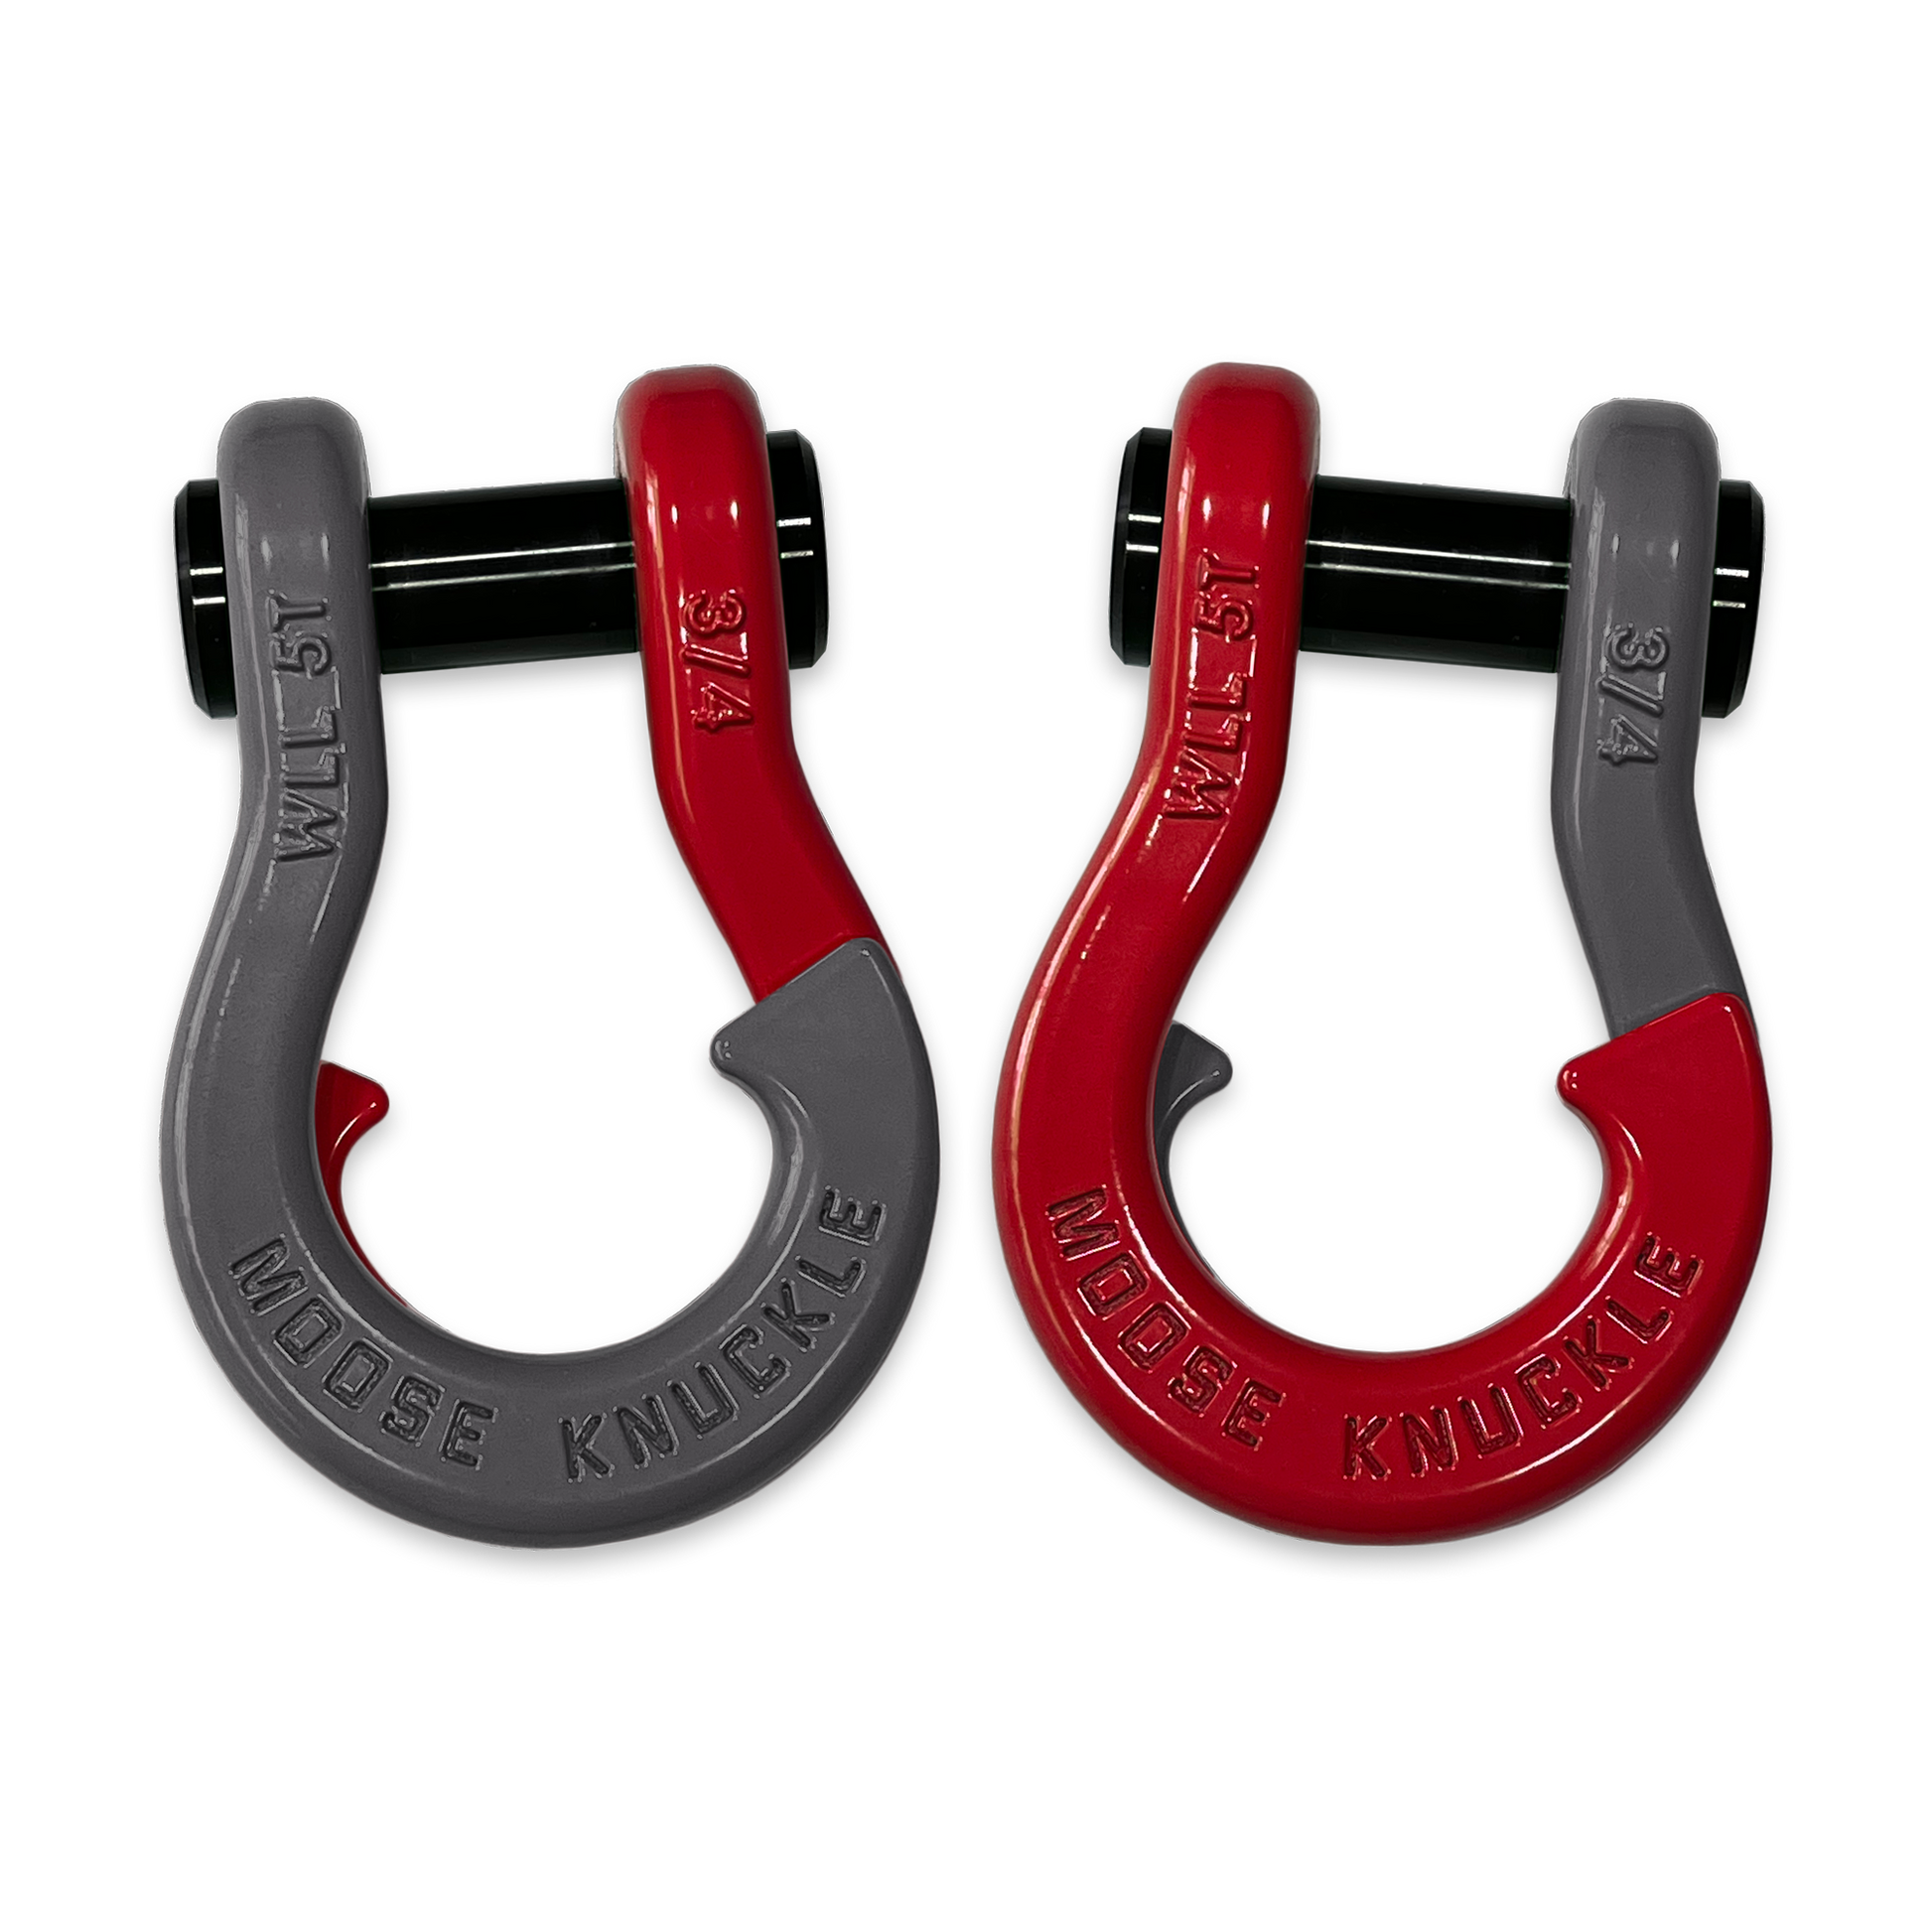 Moose Knuckle's Jowl Recovery Split Shackle 3/4 in Gun Gray and Flame Red Combo